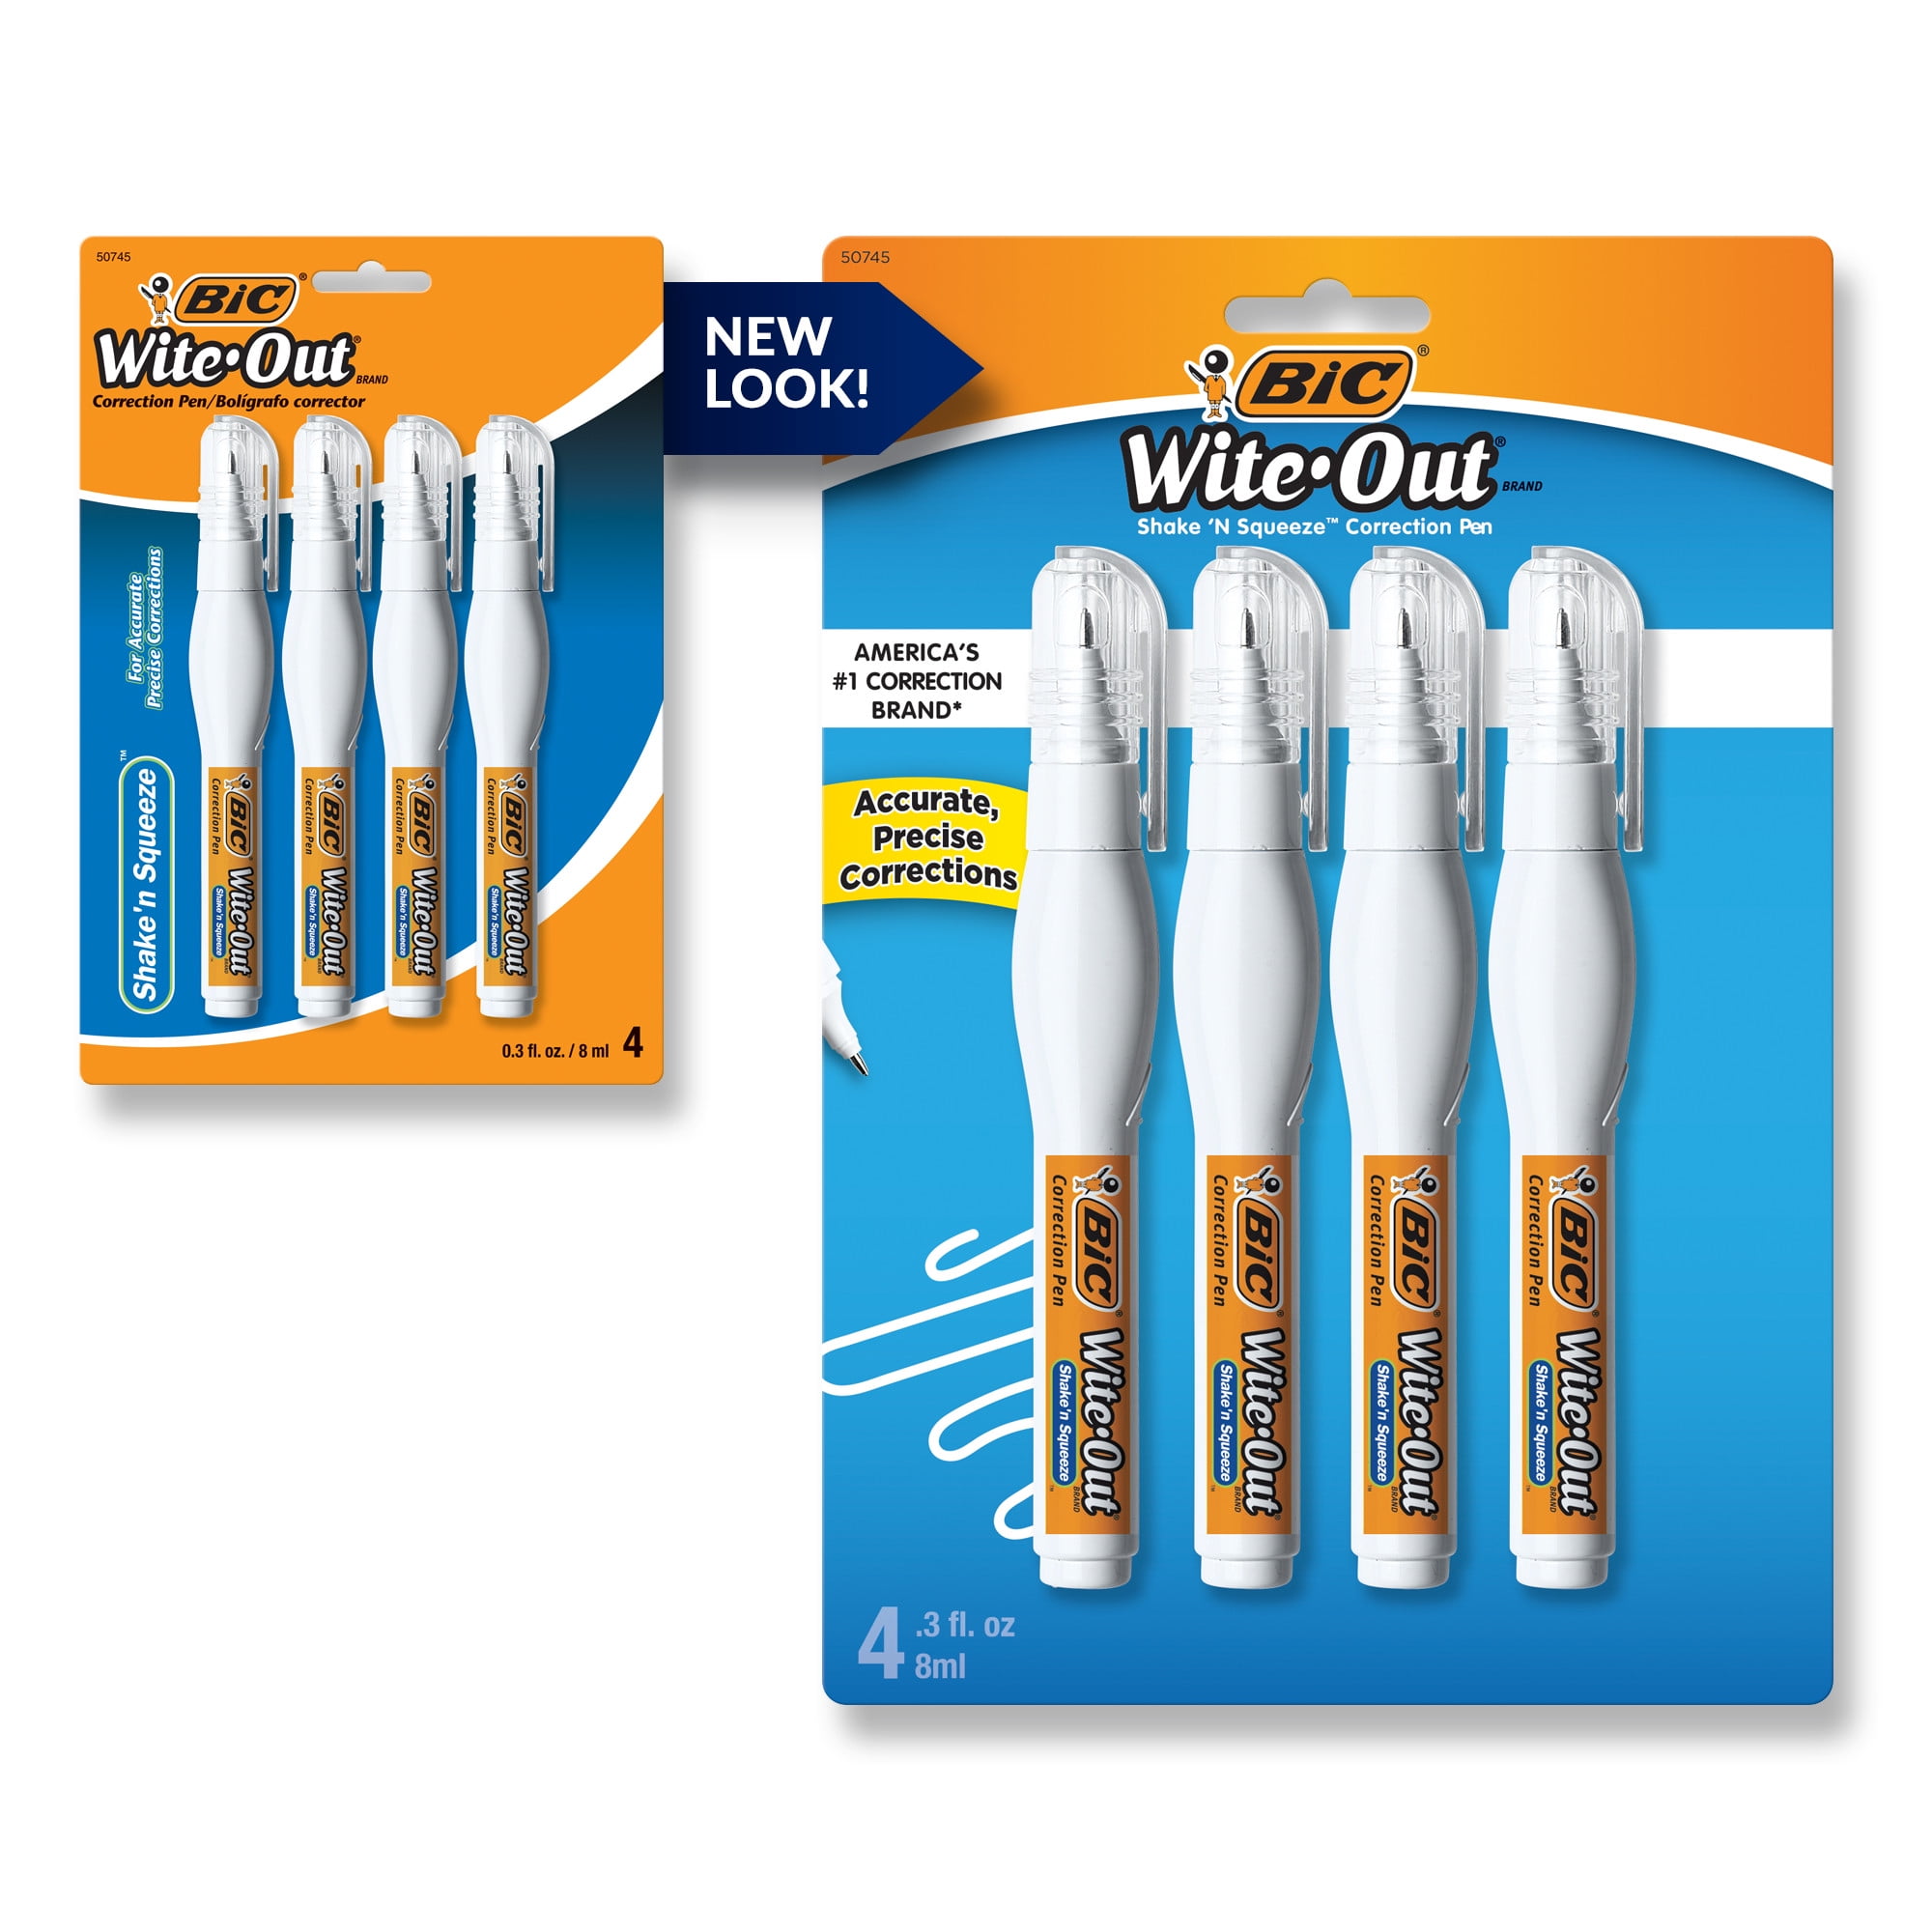 Bic Wite-Out Quick Dry Correction Fluid 20 ml Bottle White 3/Pack WOFQD324,  1 - Baker's